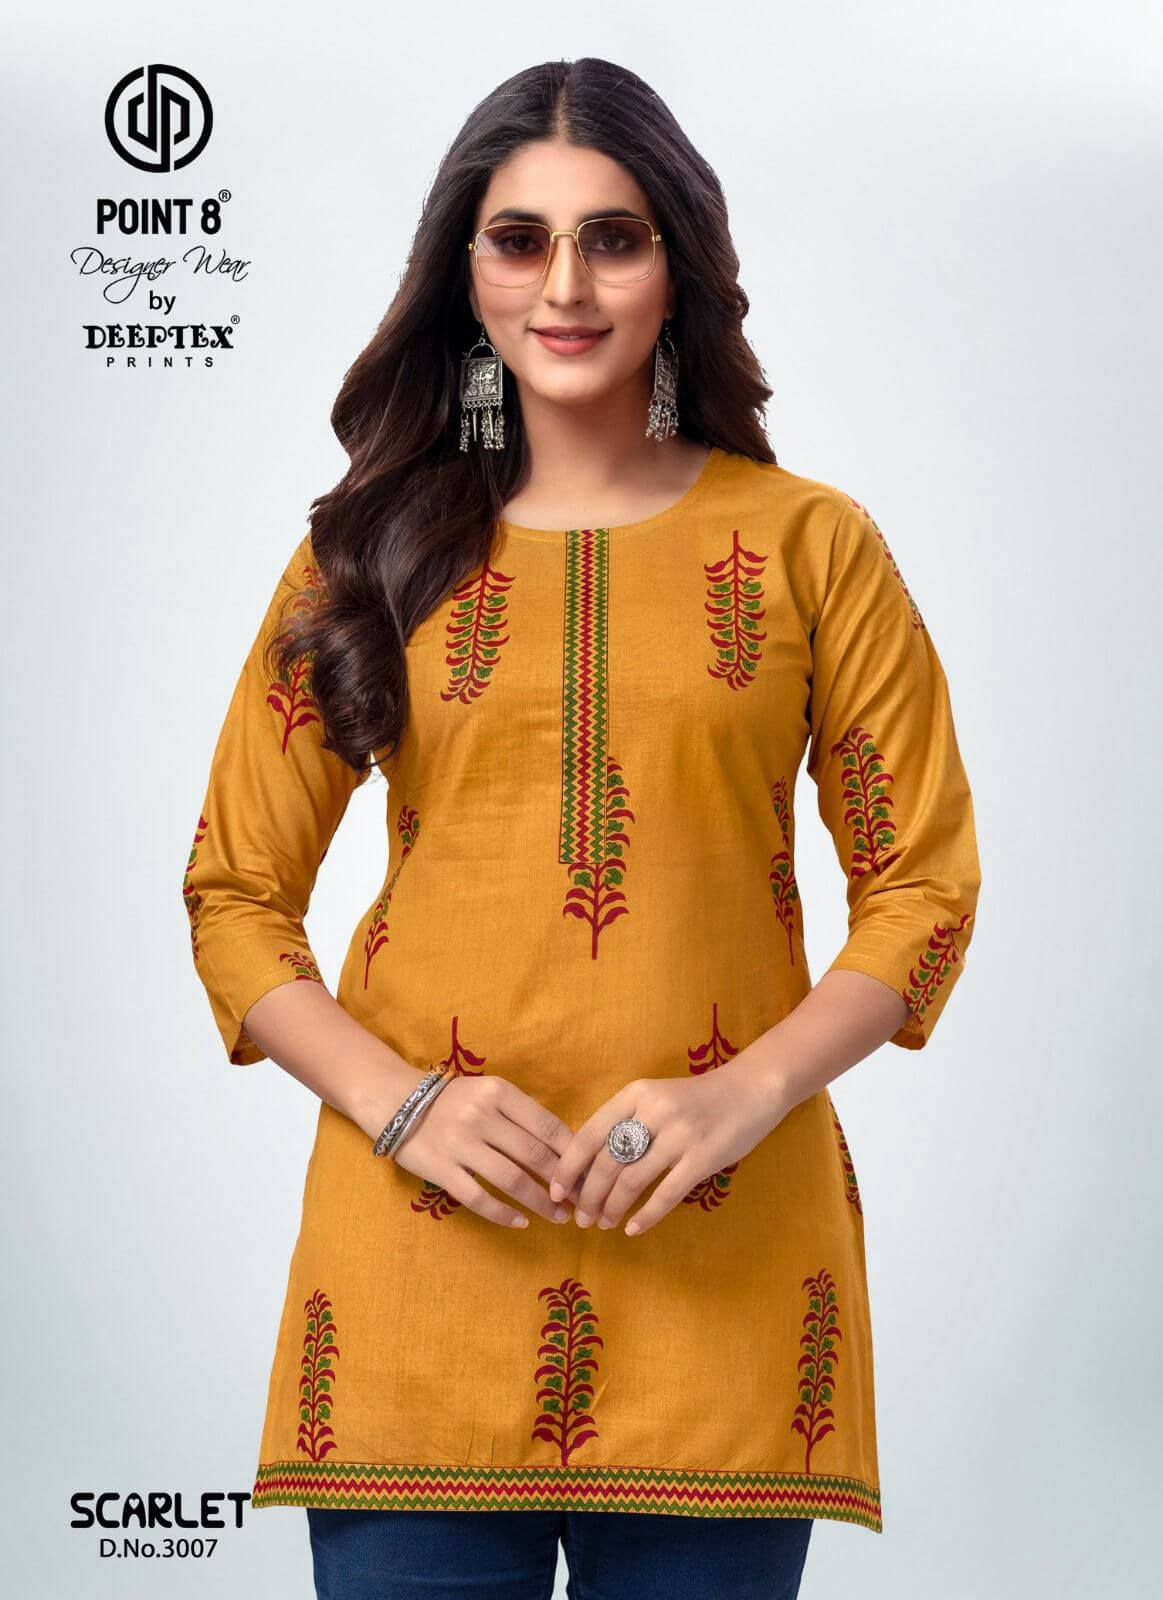 Deeptex Point 8 Scarlet Vol 3 Ladies Top Catalog collection 11